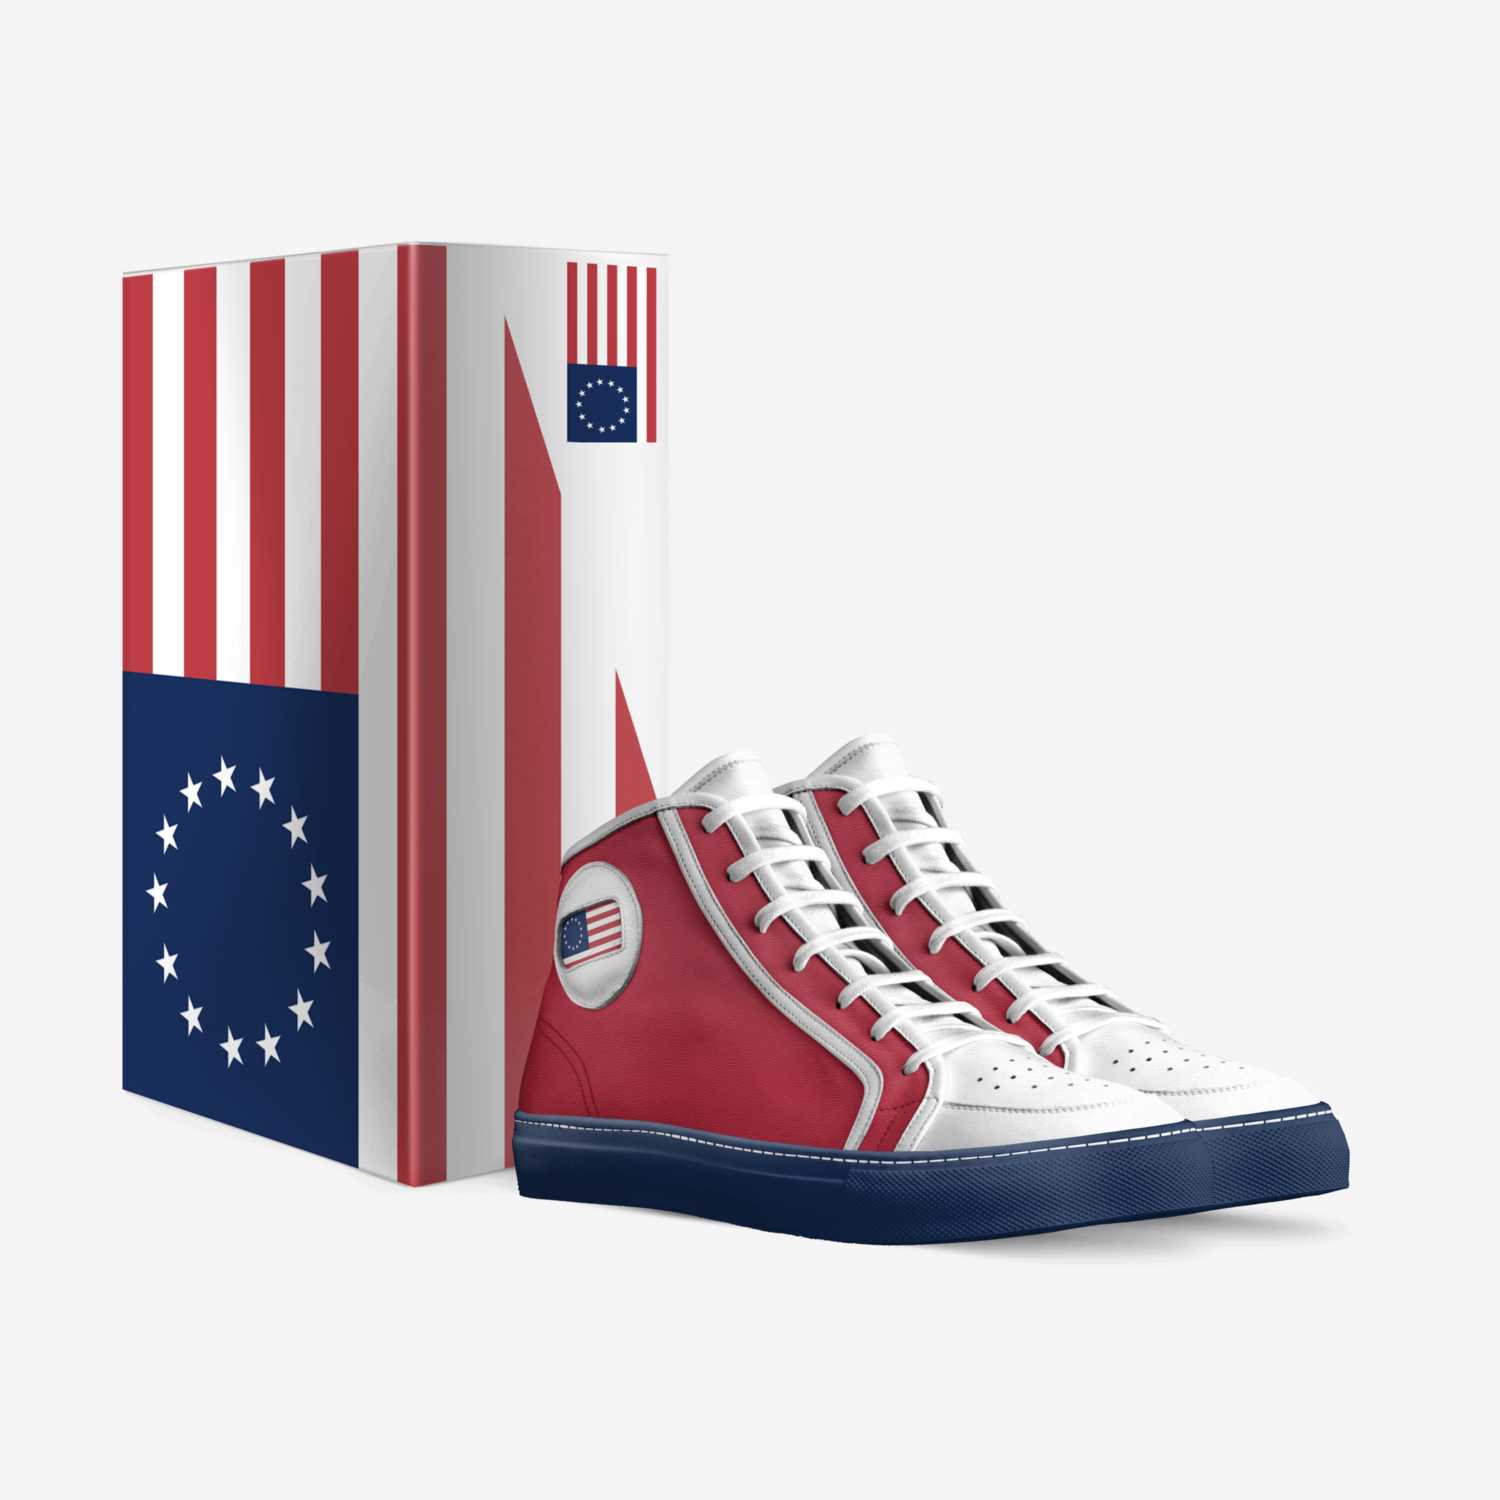 The Betsy Ross custom made in Italy shoes by Matthew Gardner | Box view